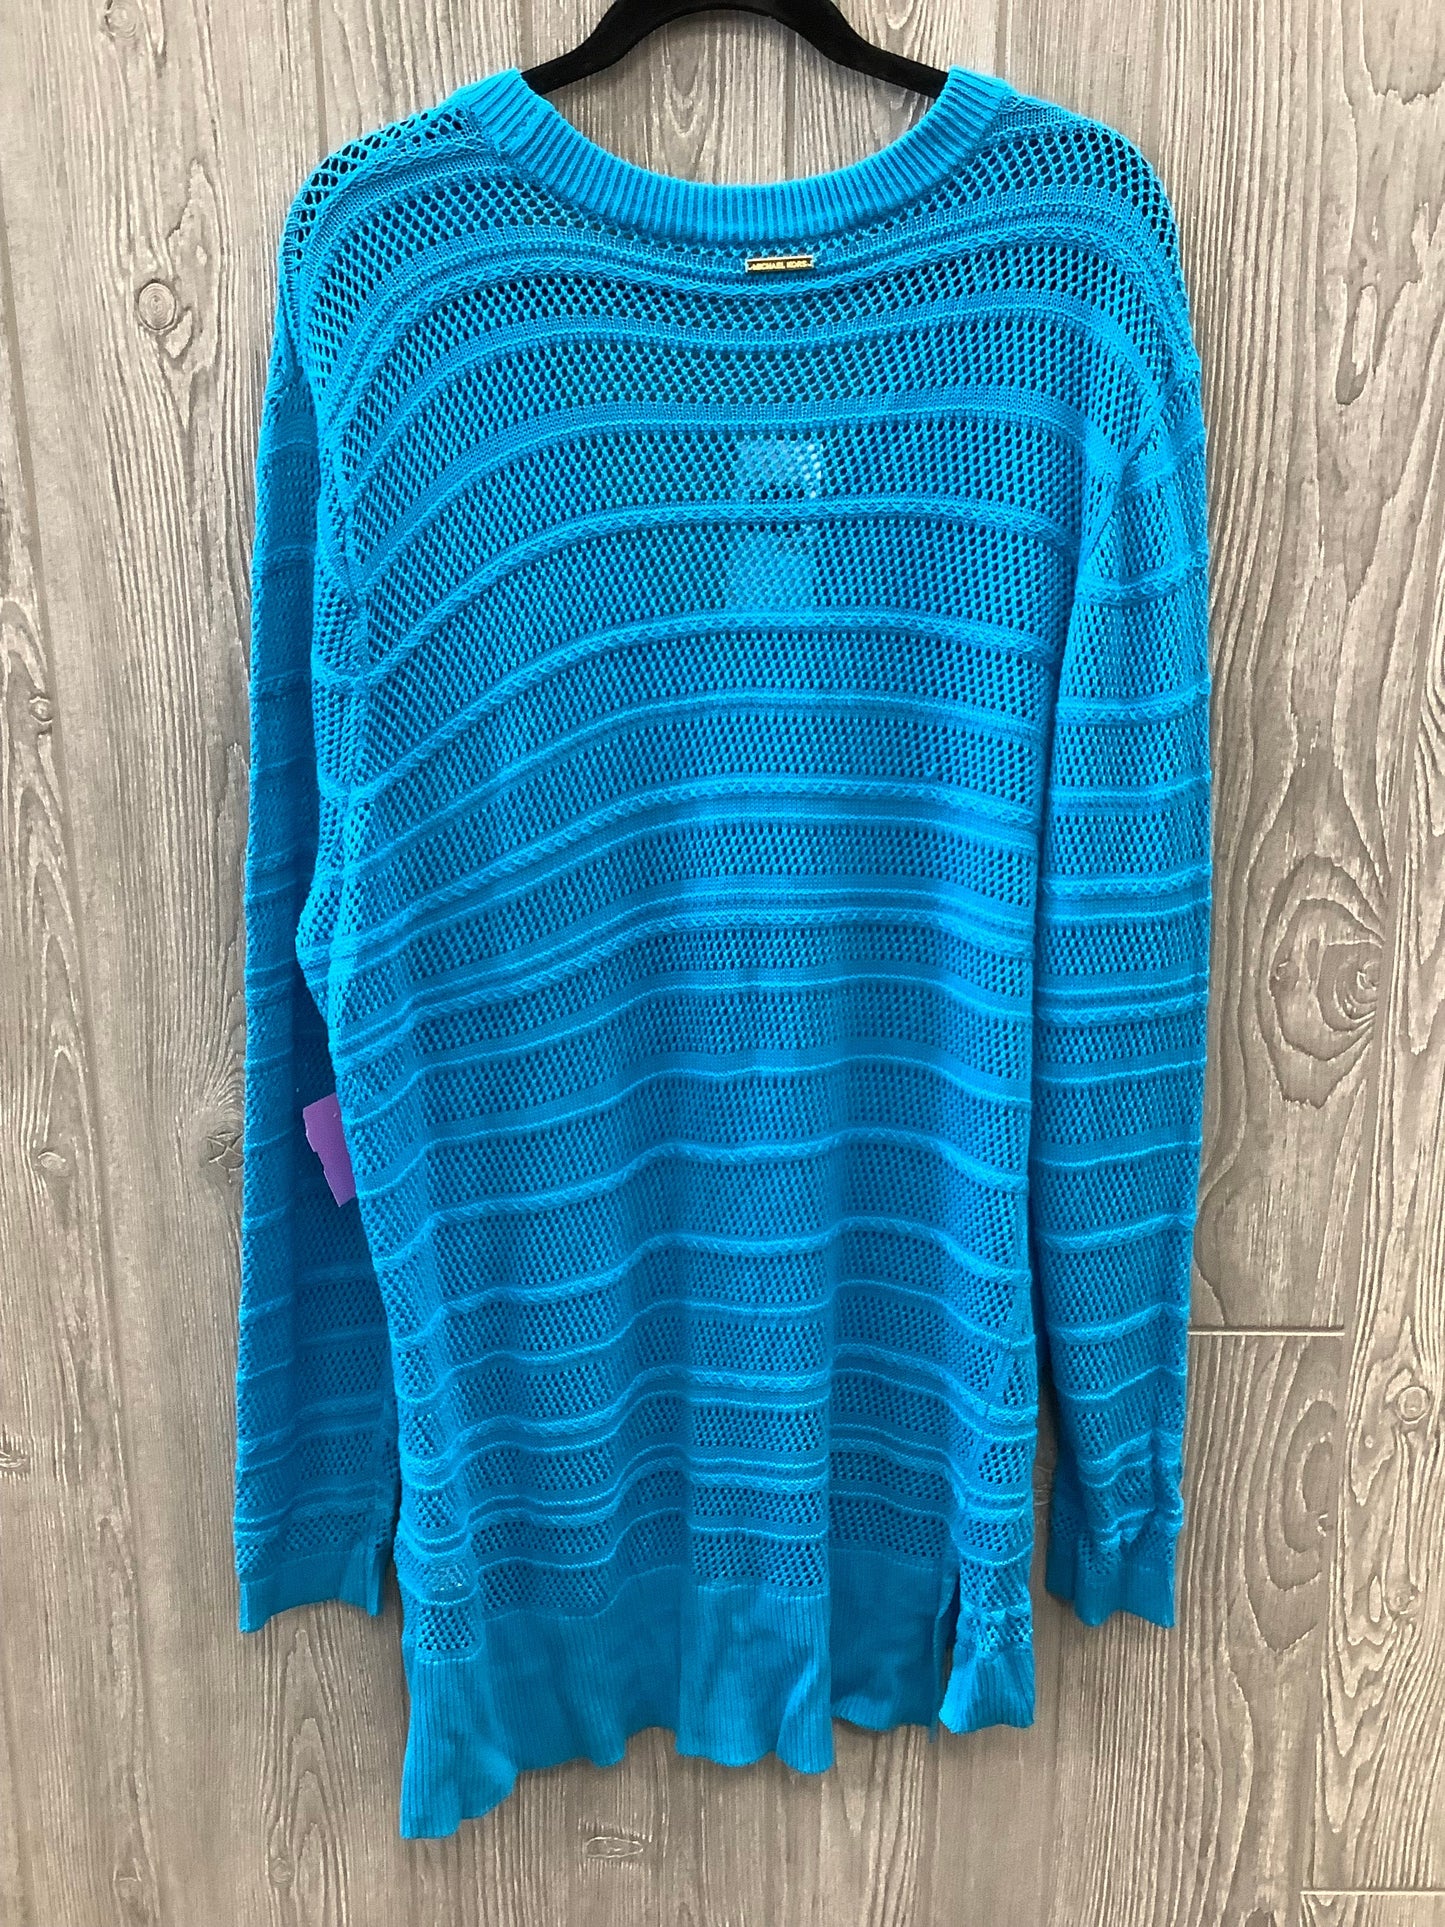 Sweater By Michael Kors  Size: 2x